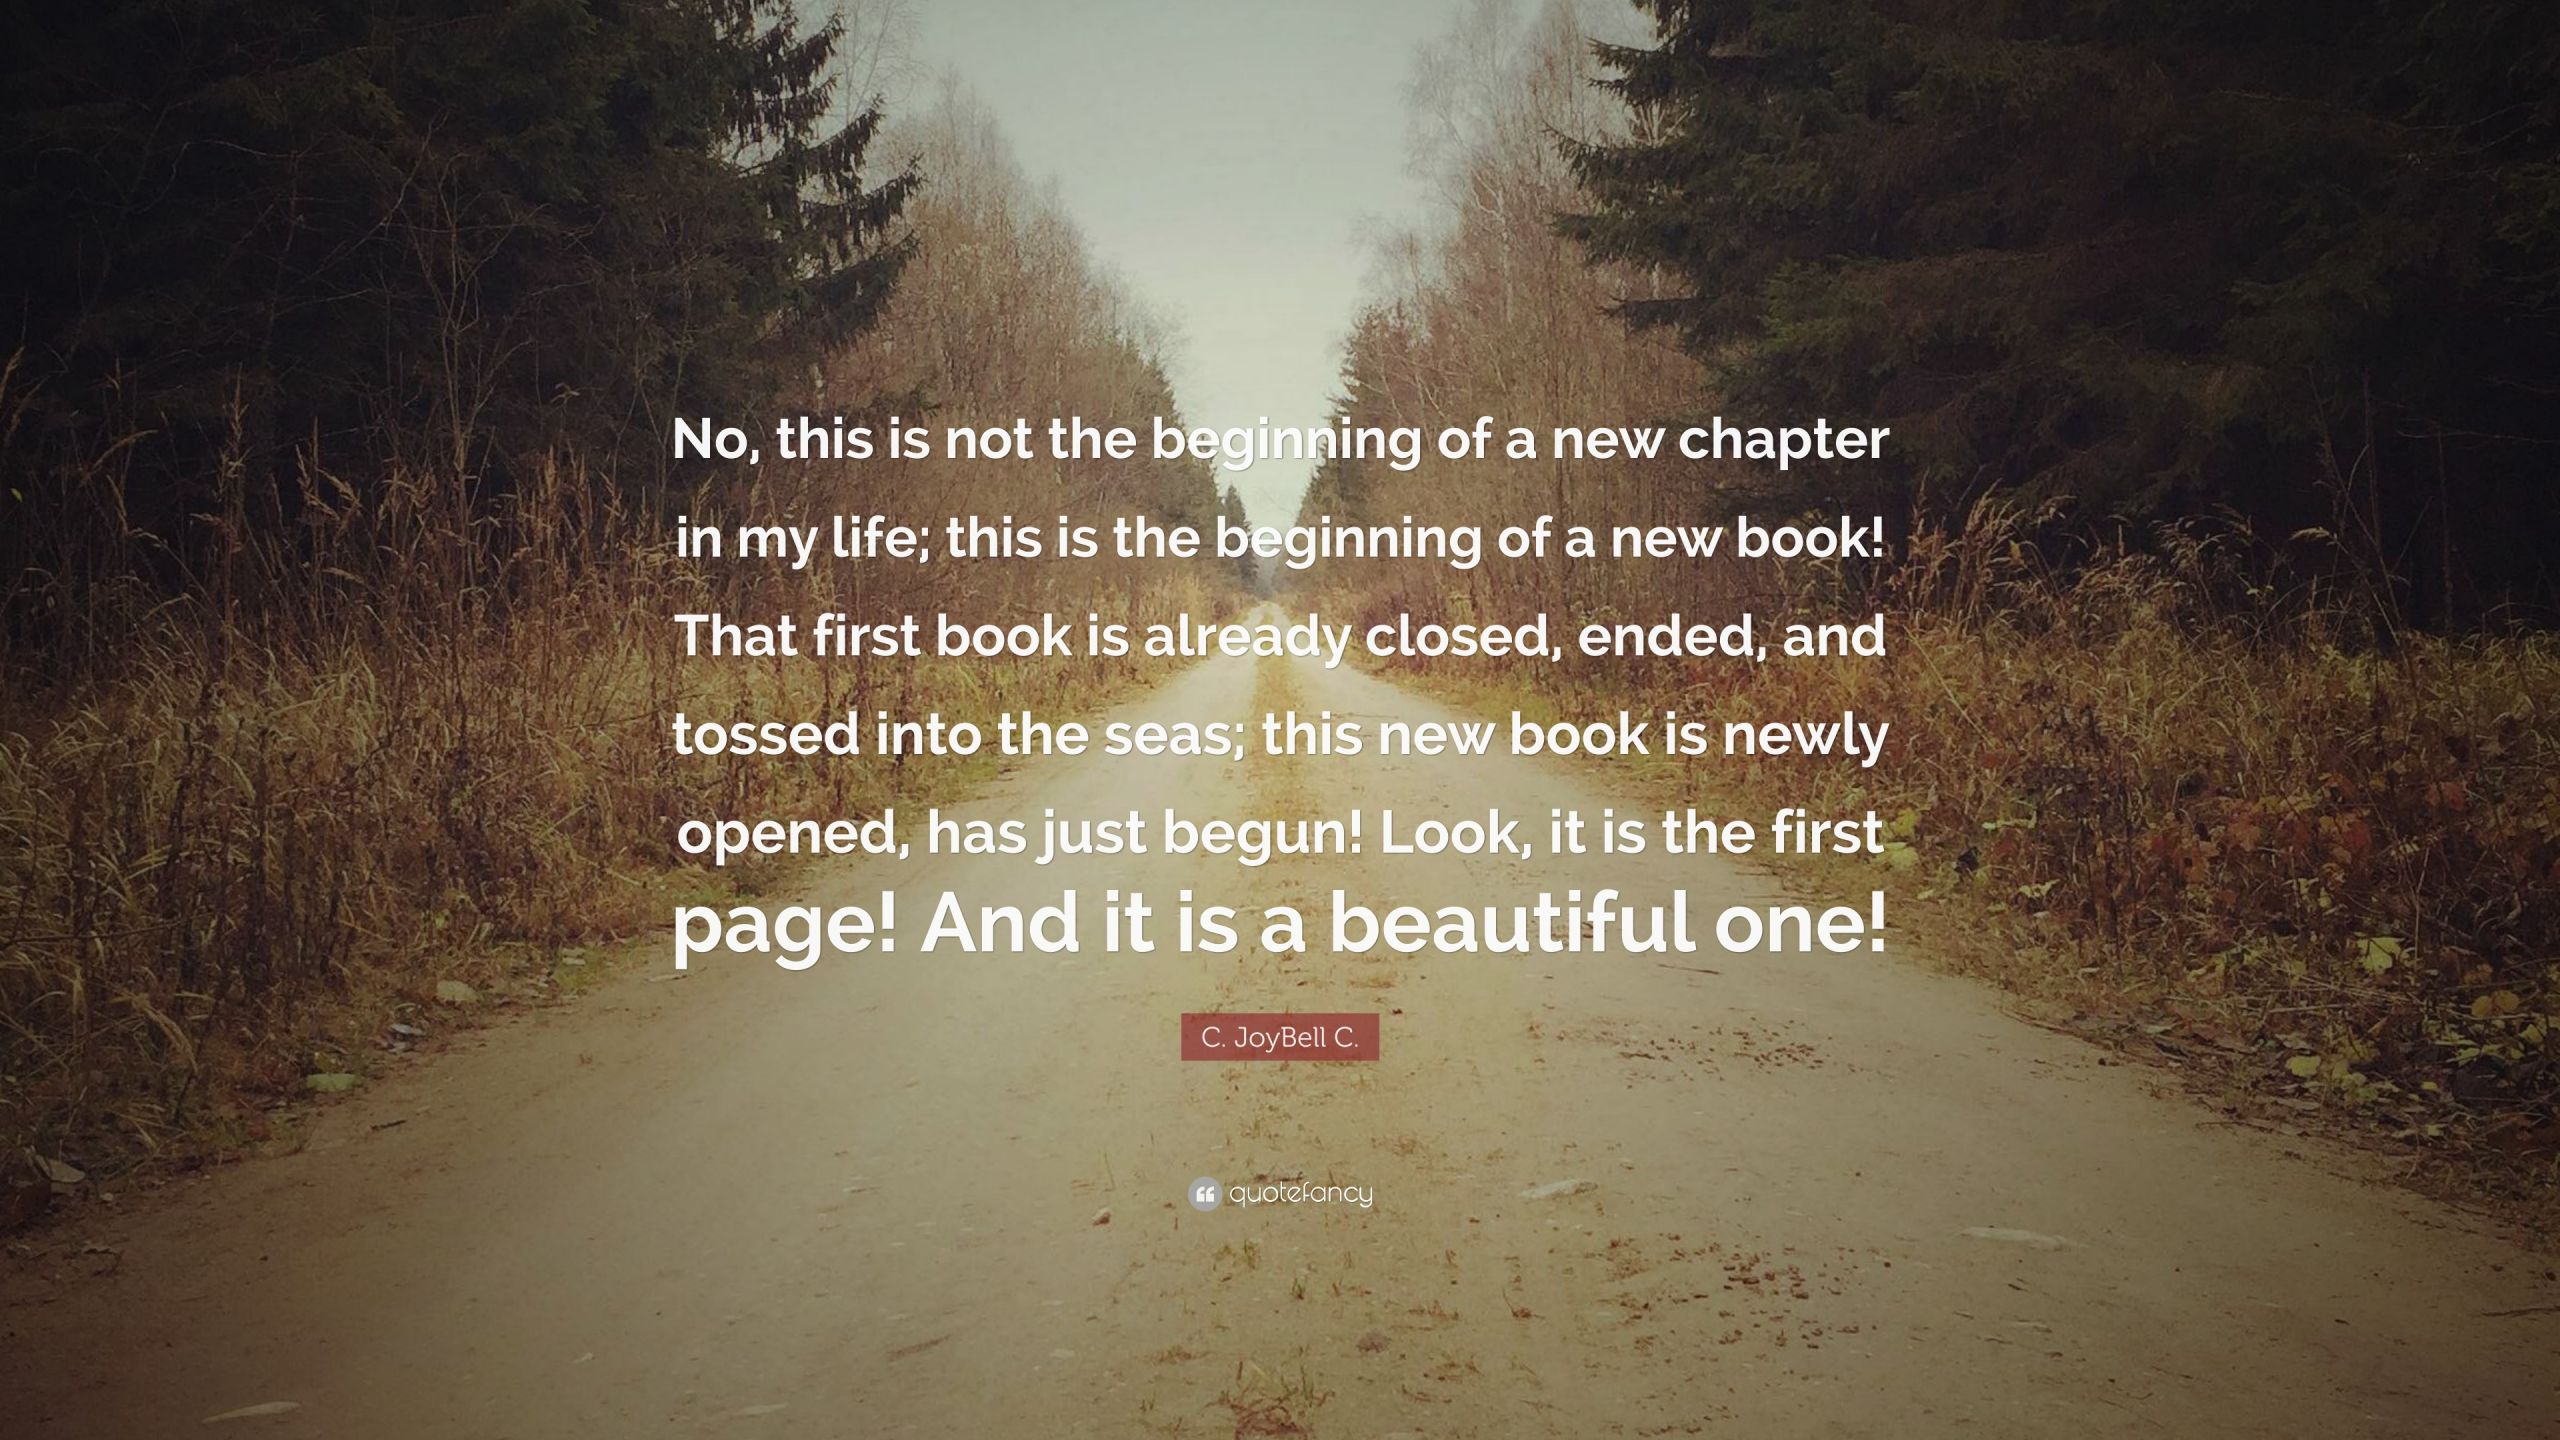 New Chapters In Life Quotes
 C JoyBell C Quotes 60 wallpapers Quotefancy